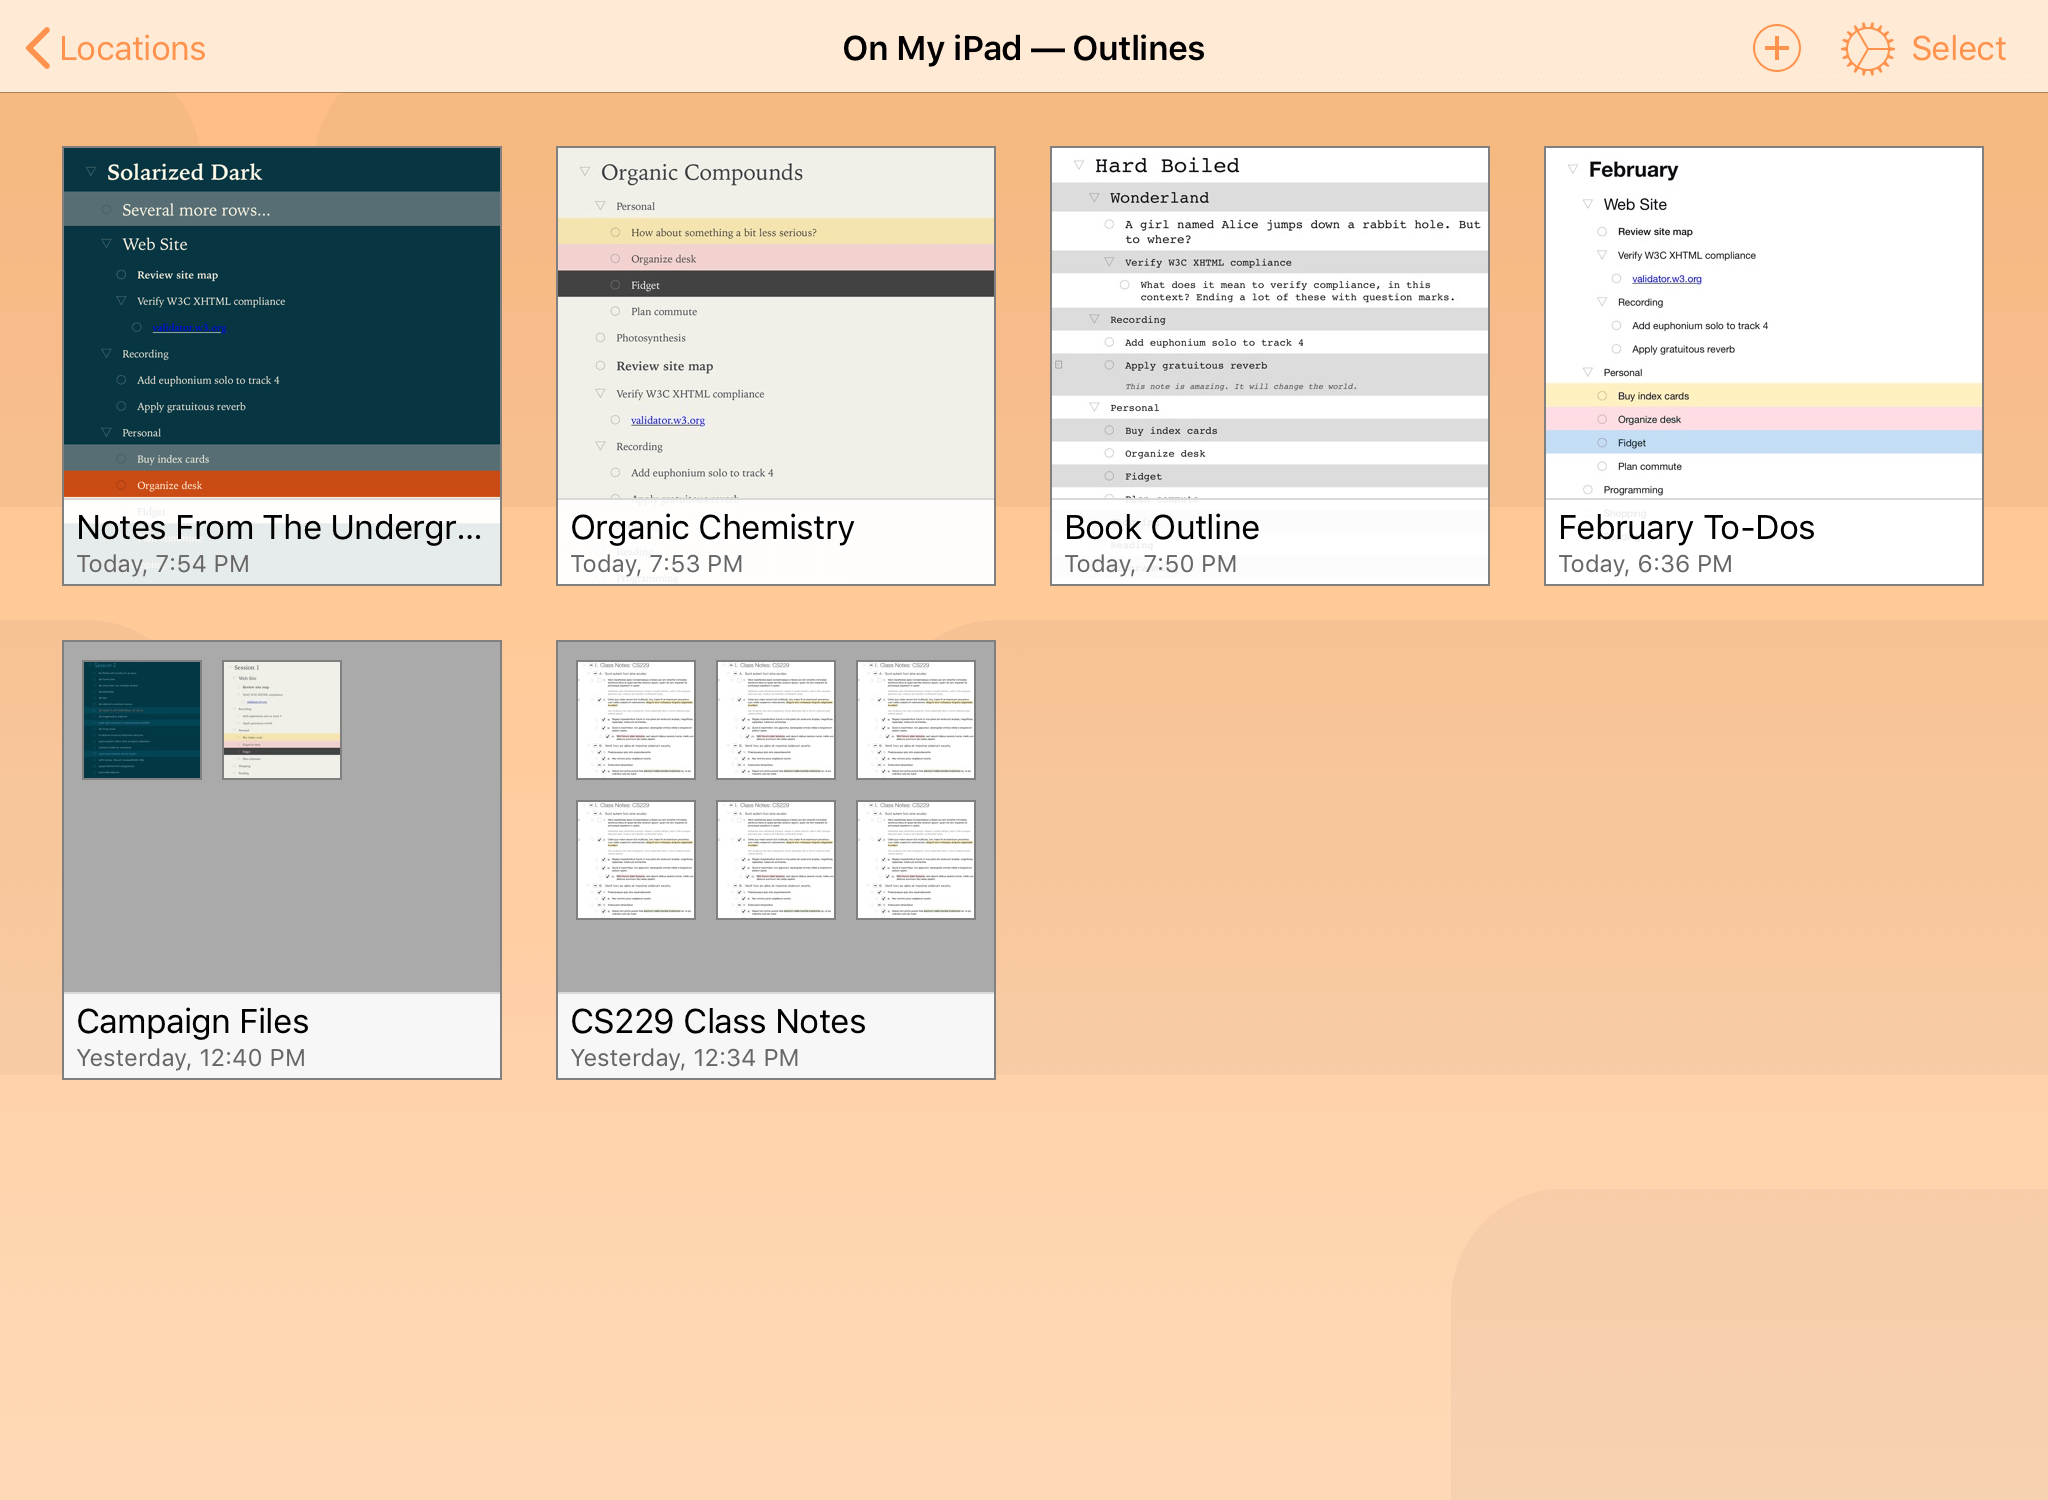 The On My iPad folder, as viewed in the Document Browser